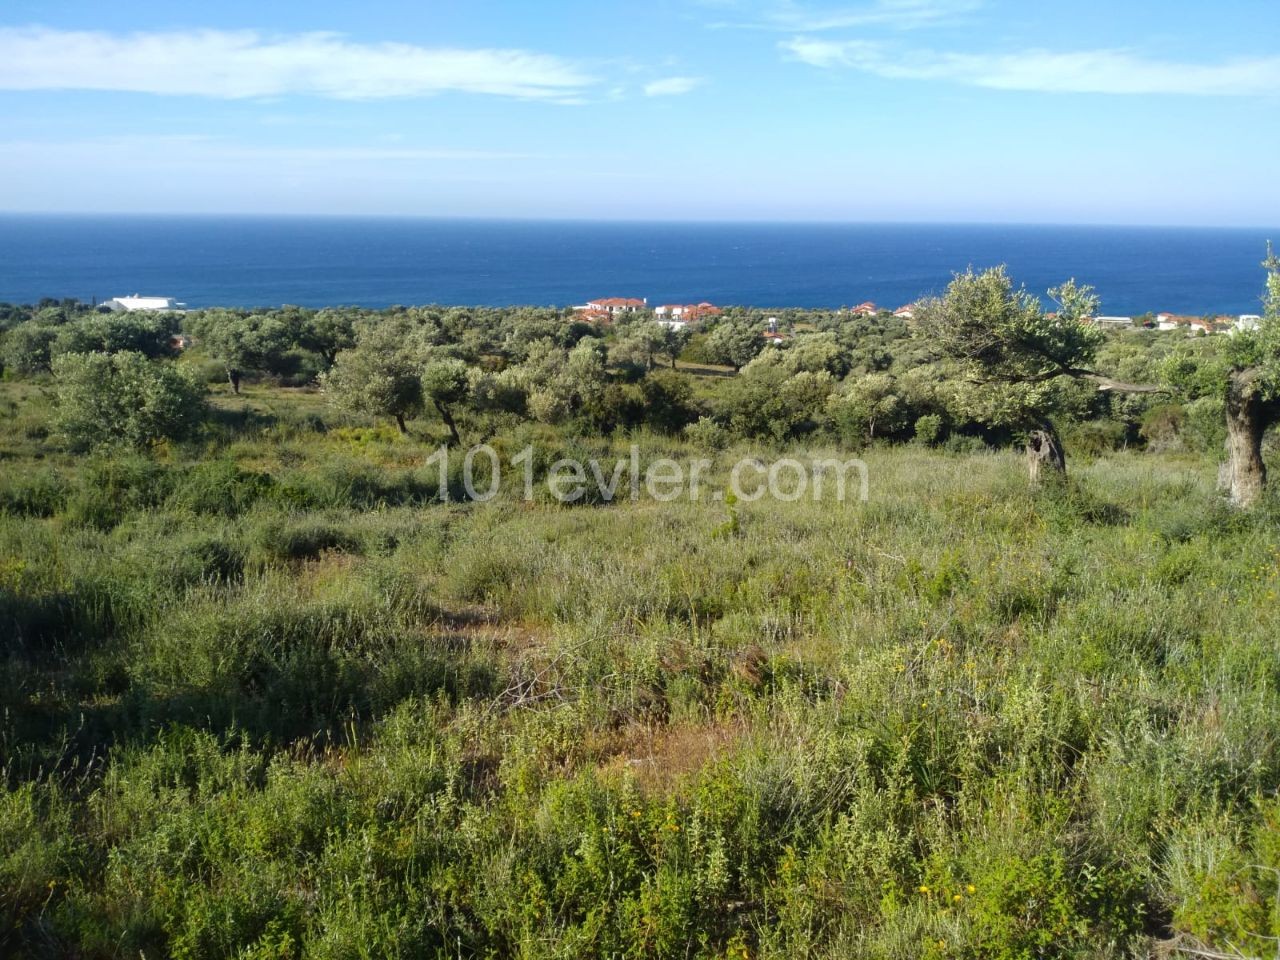 A TURN OF SEA VIEW IN THE ROCKS 41,000 GBP LAND ** 